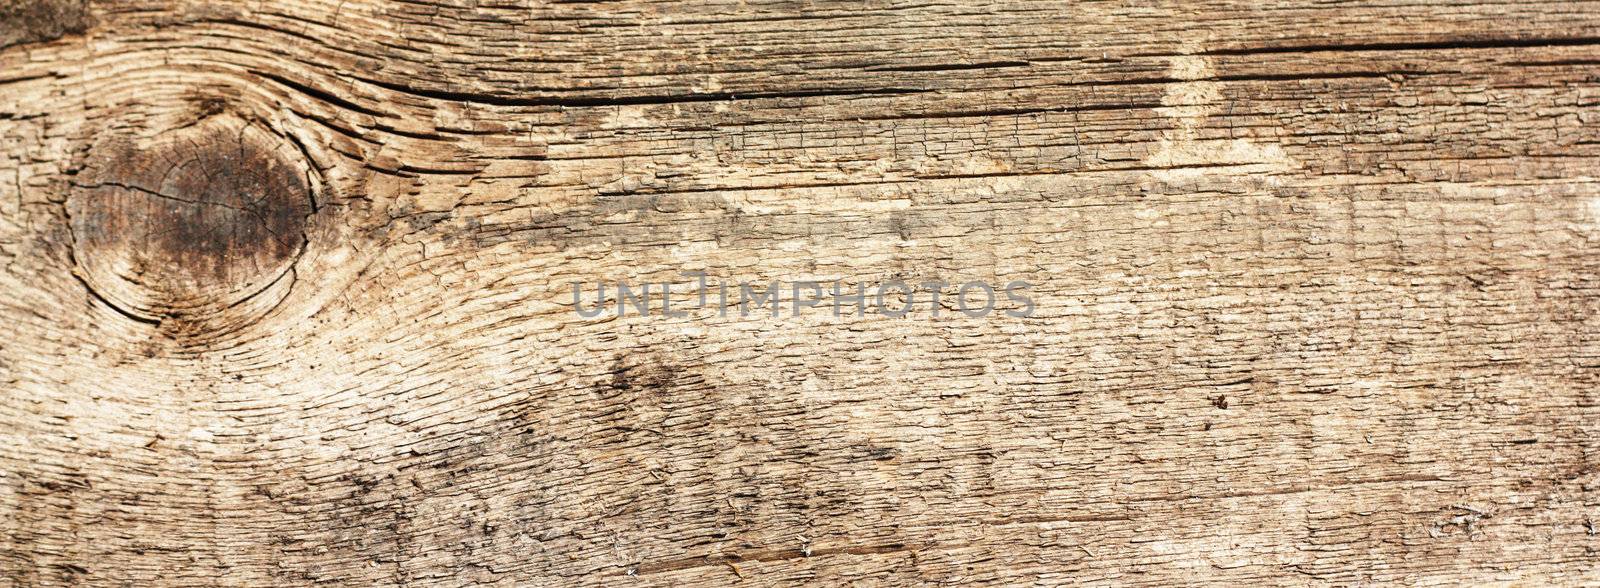 Wooden texture - can be used as a background  by schankz